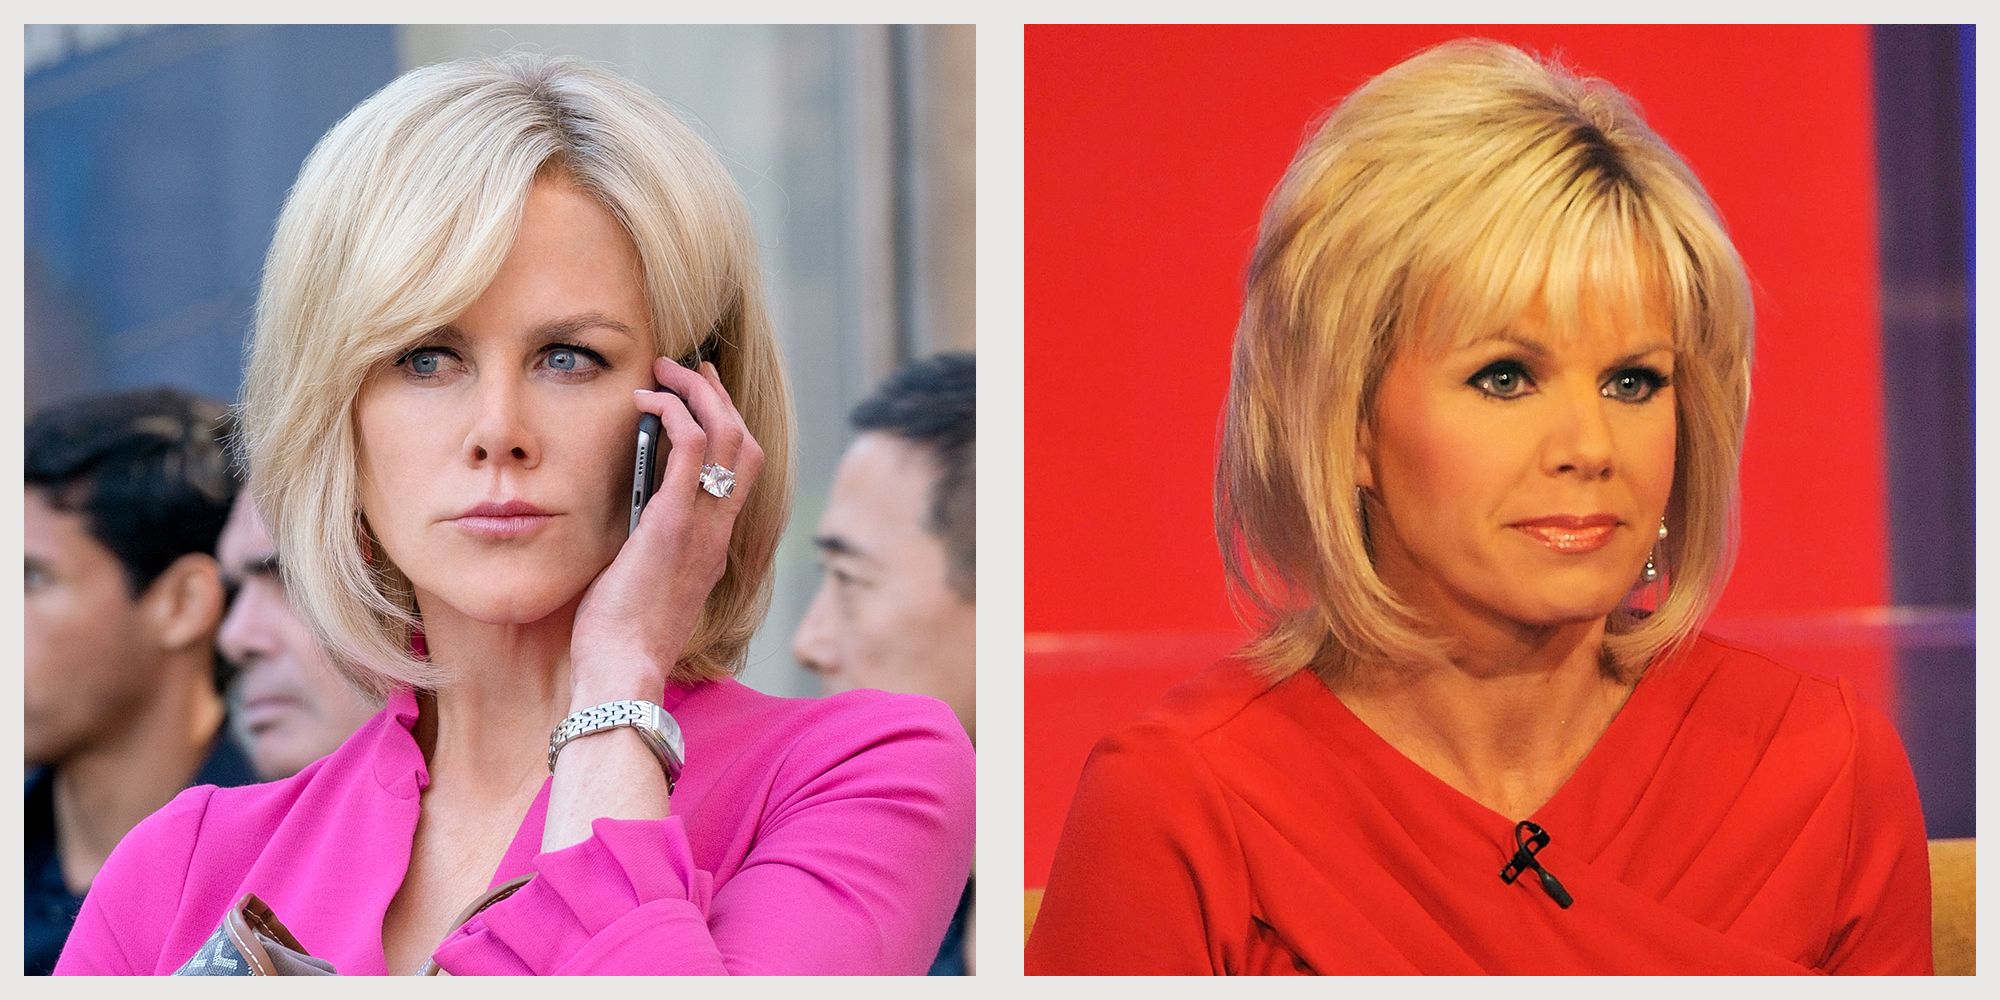 Bombshell S Cast Compared The Real Fox News Workers In Photos